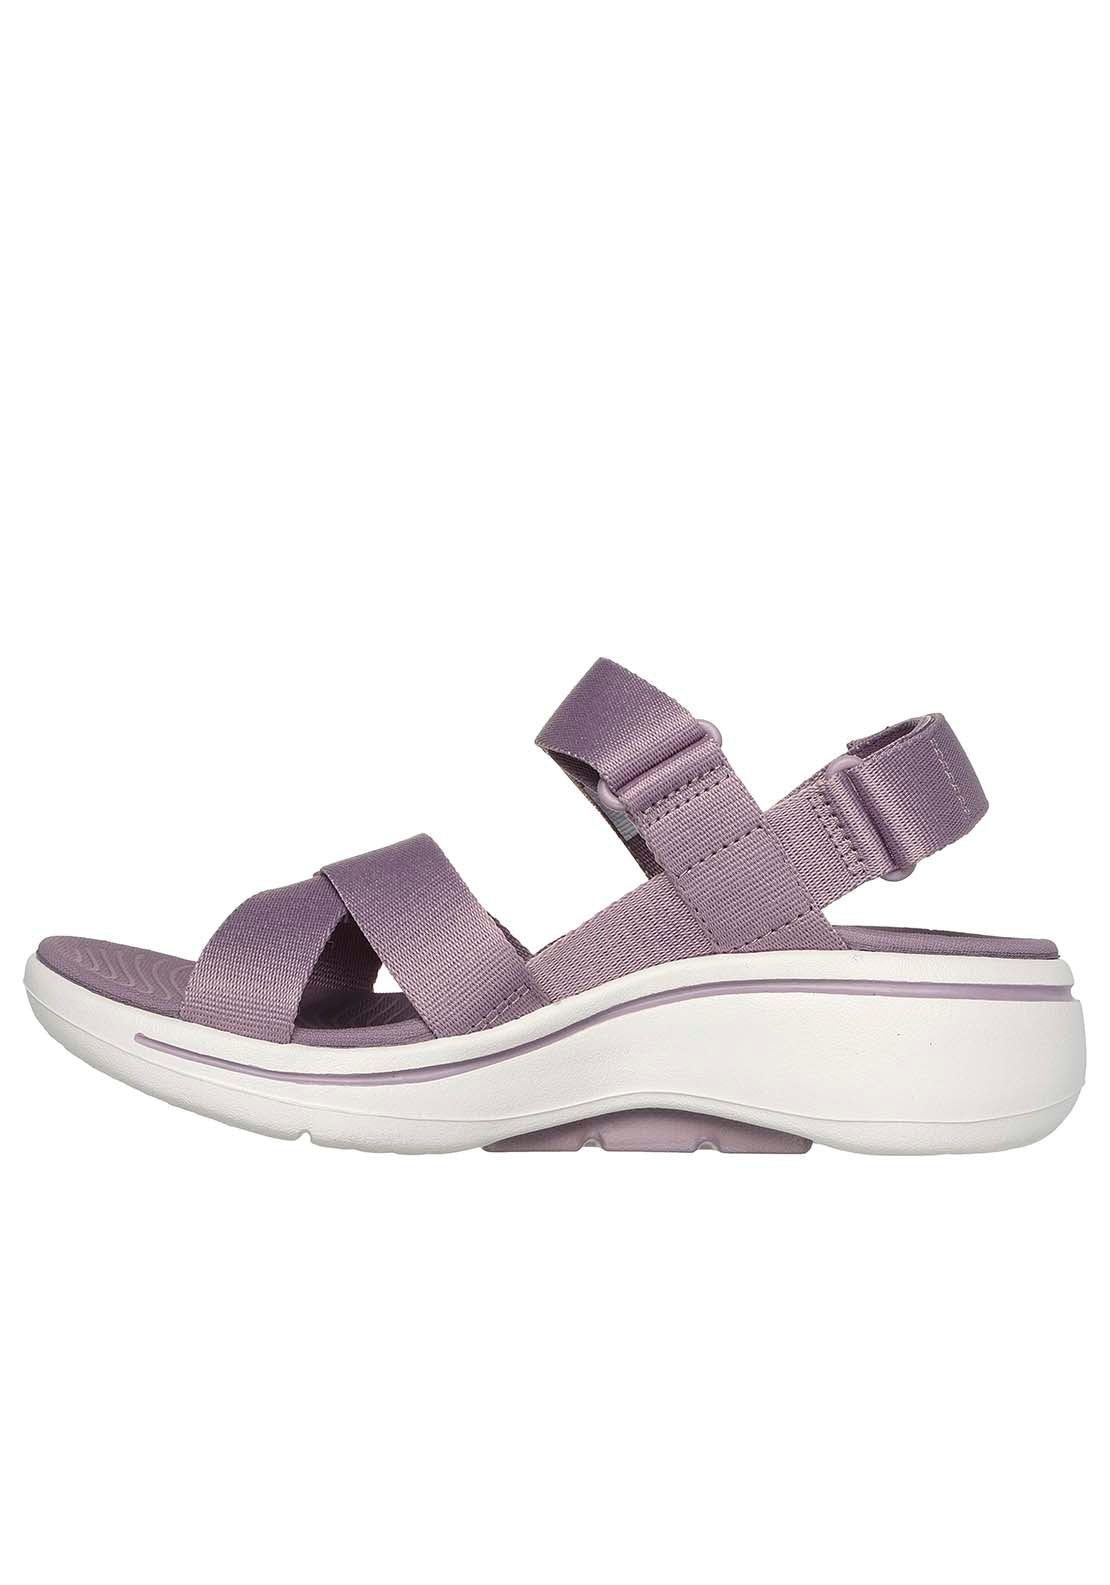 Skechers Go Walk Arch Fit Sandal 4 Shaws Department Stores